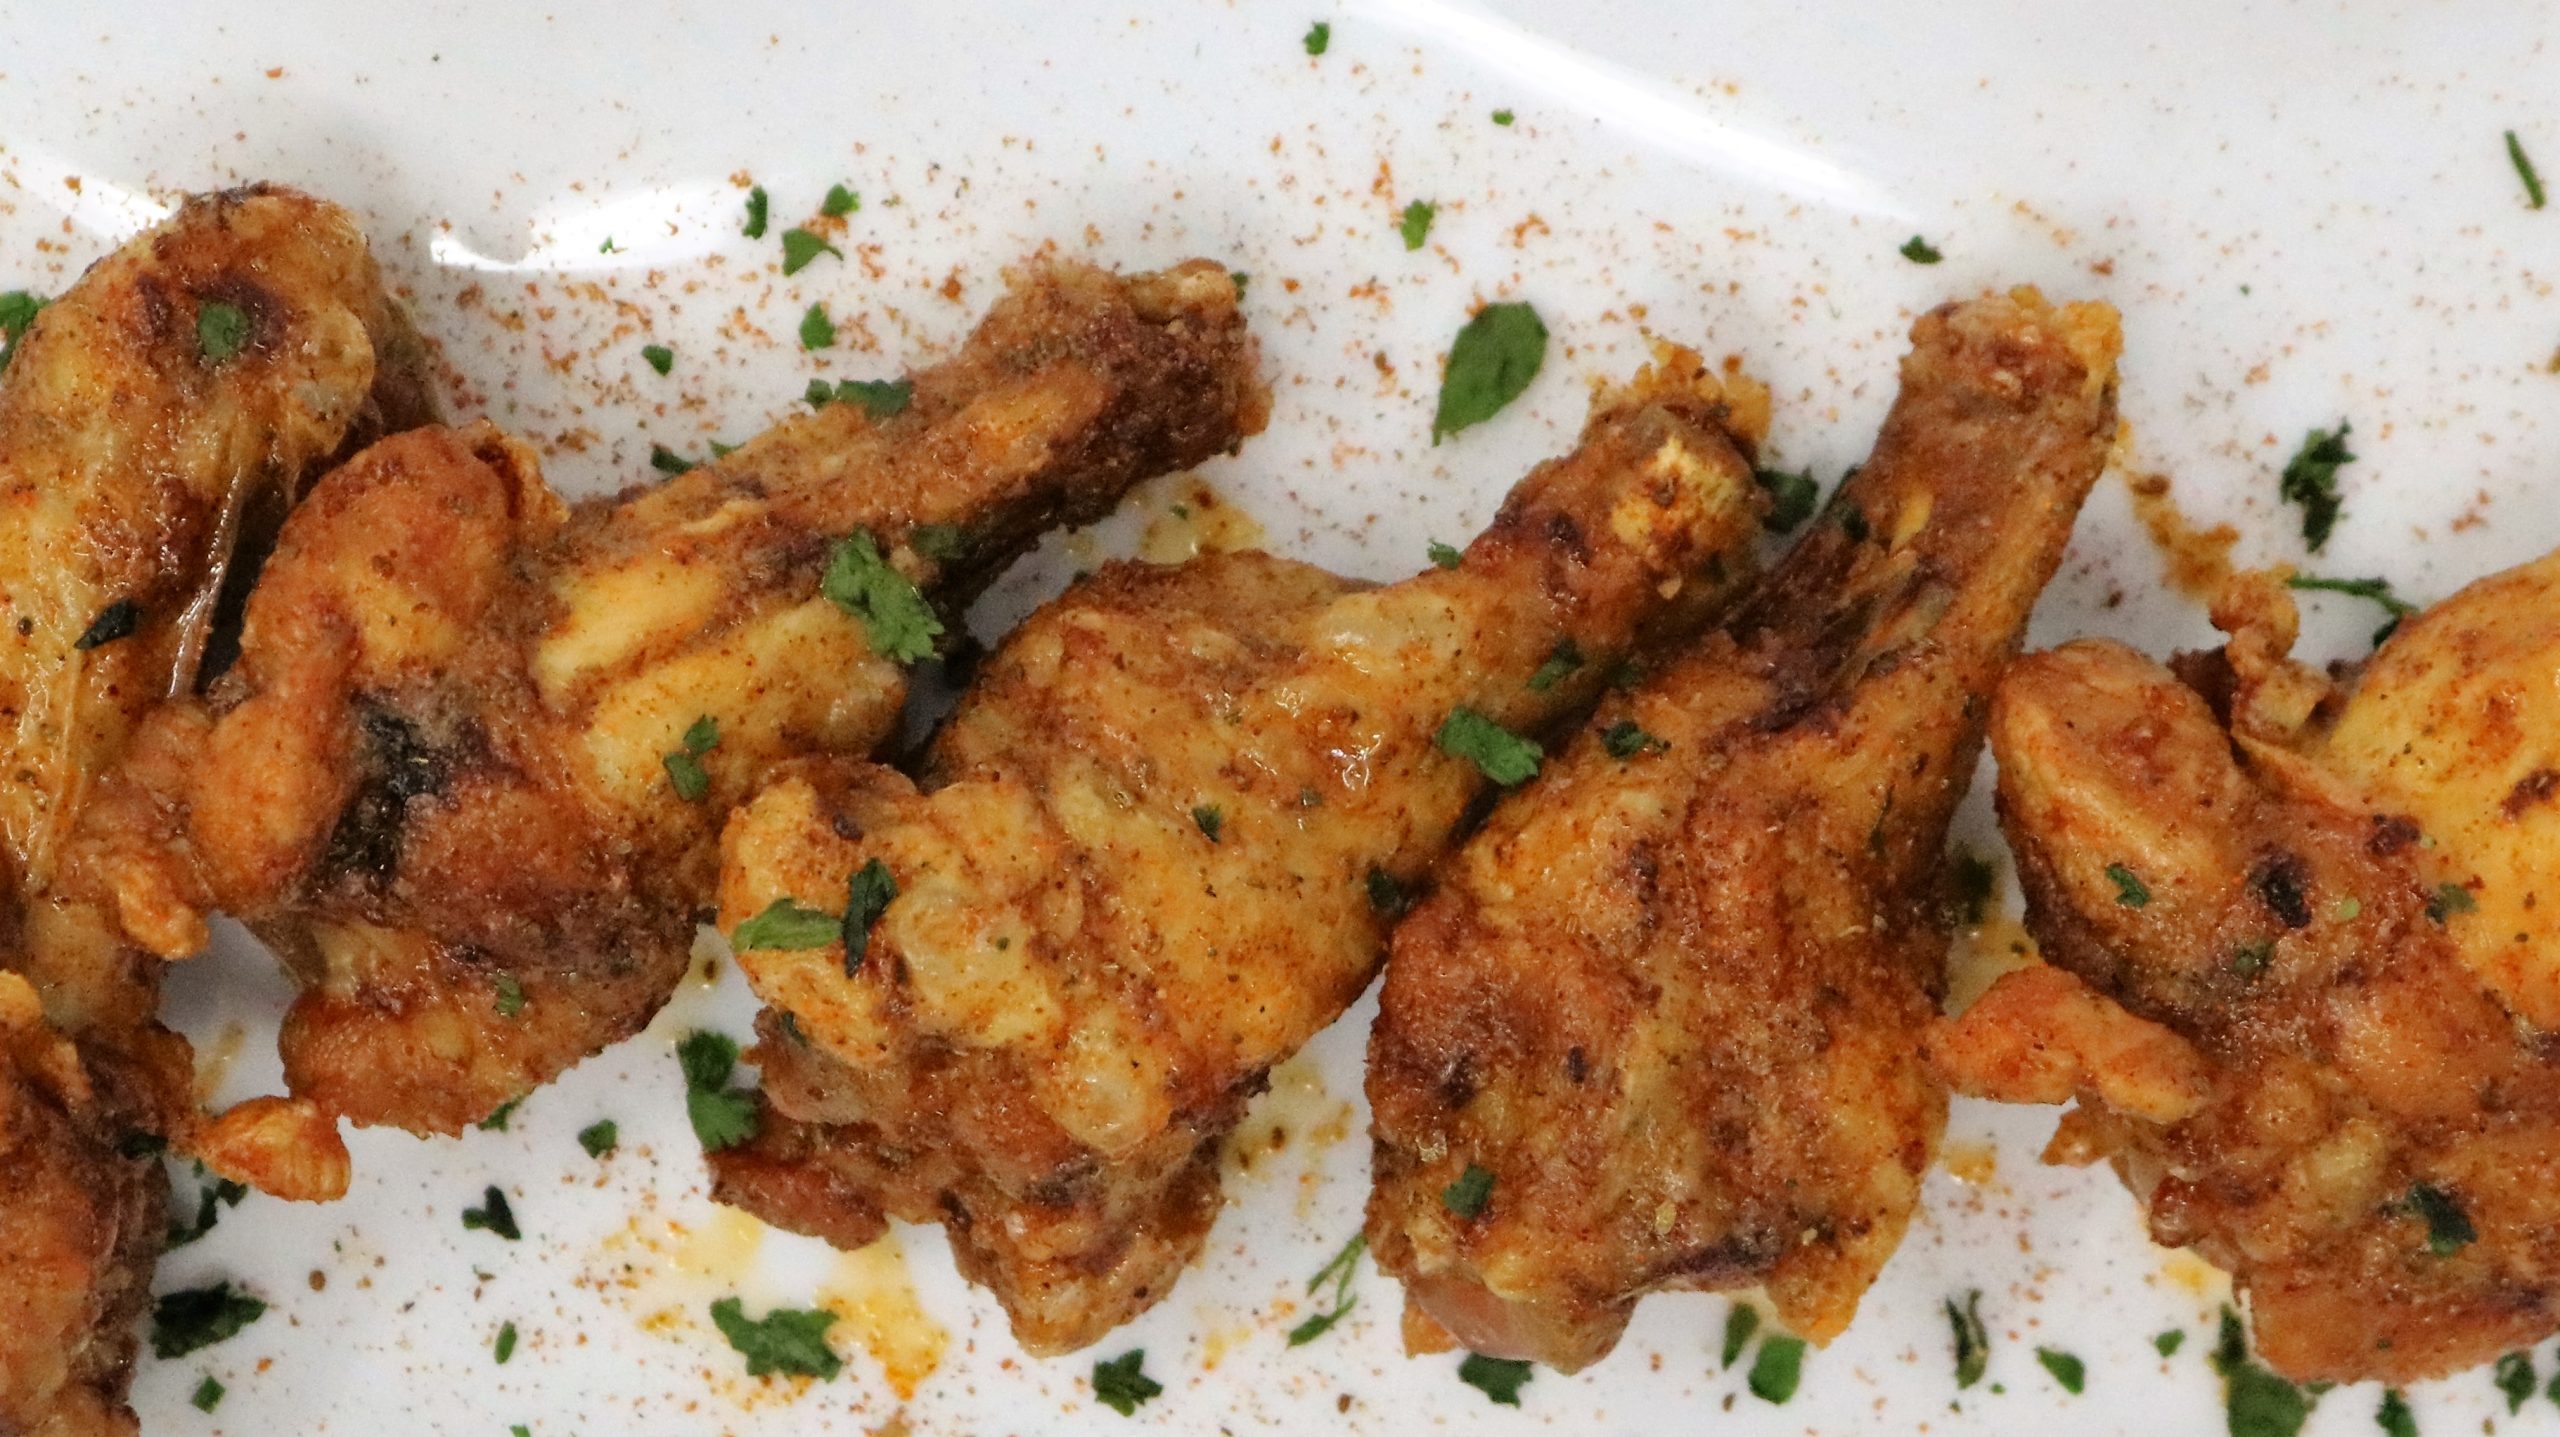 A plate of fried chicken with herbs on top.